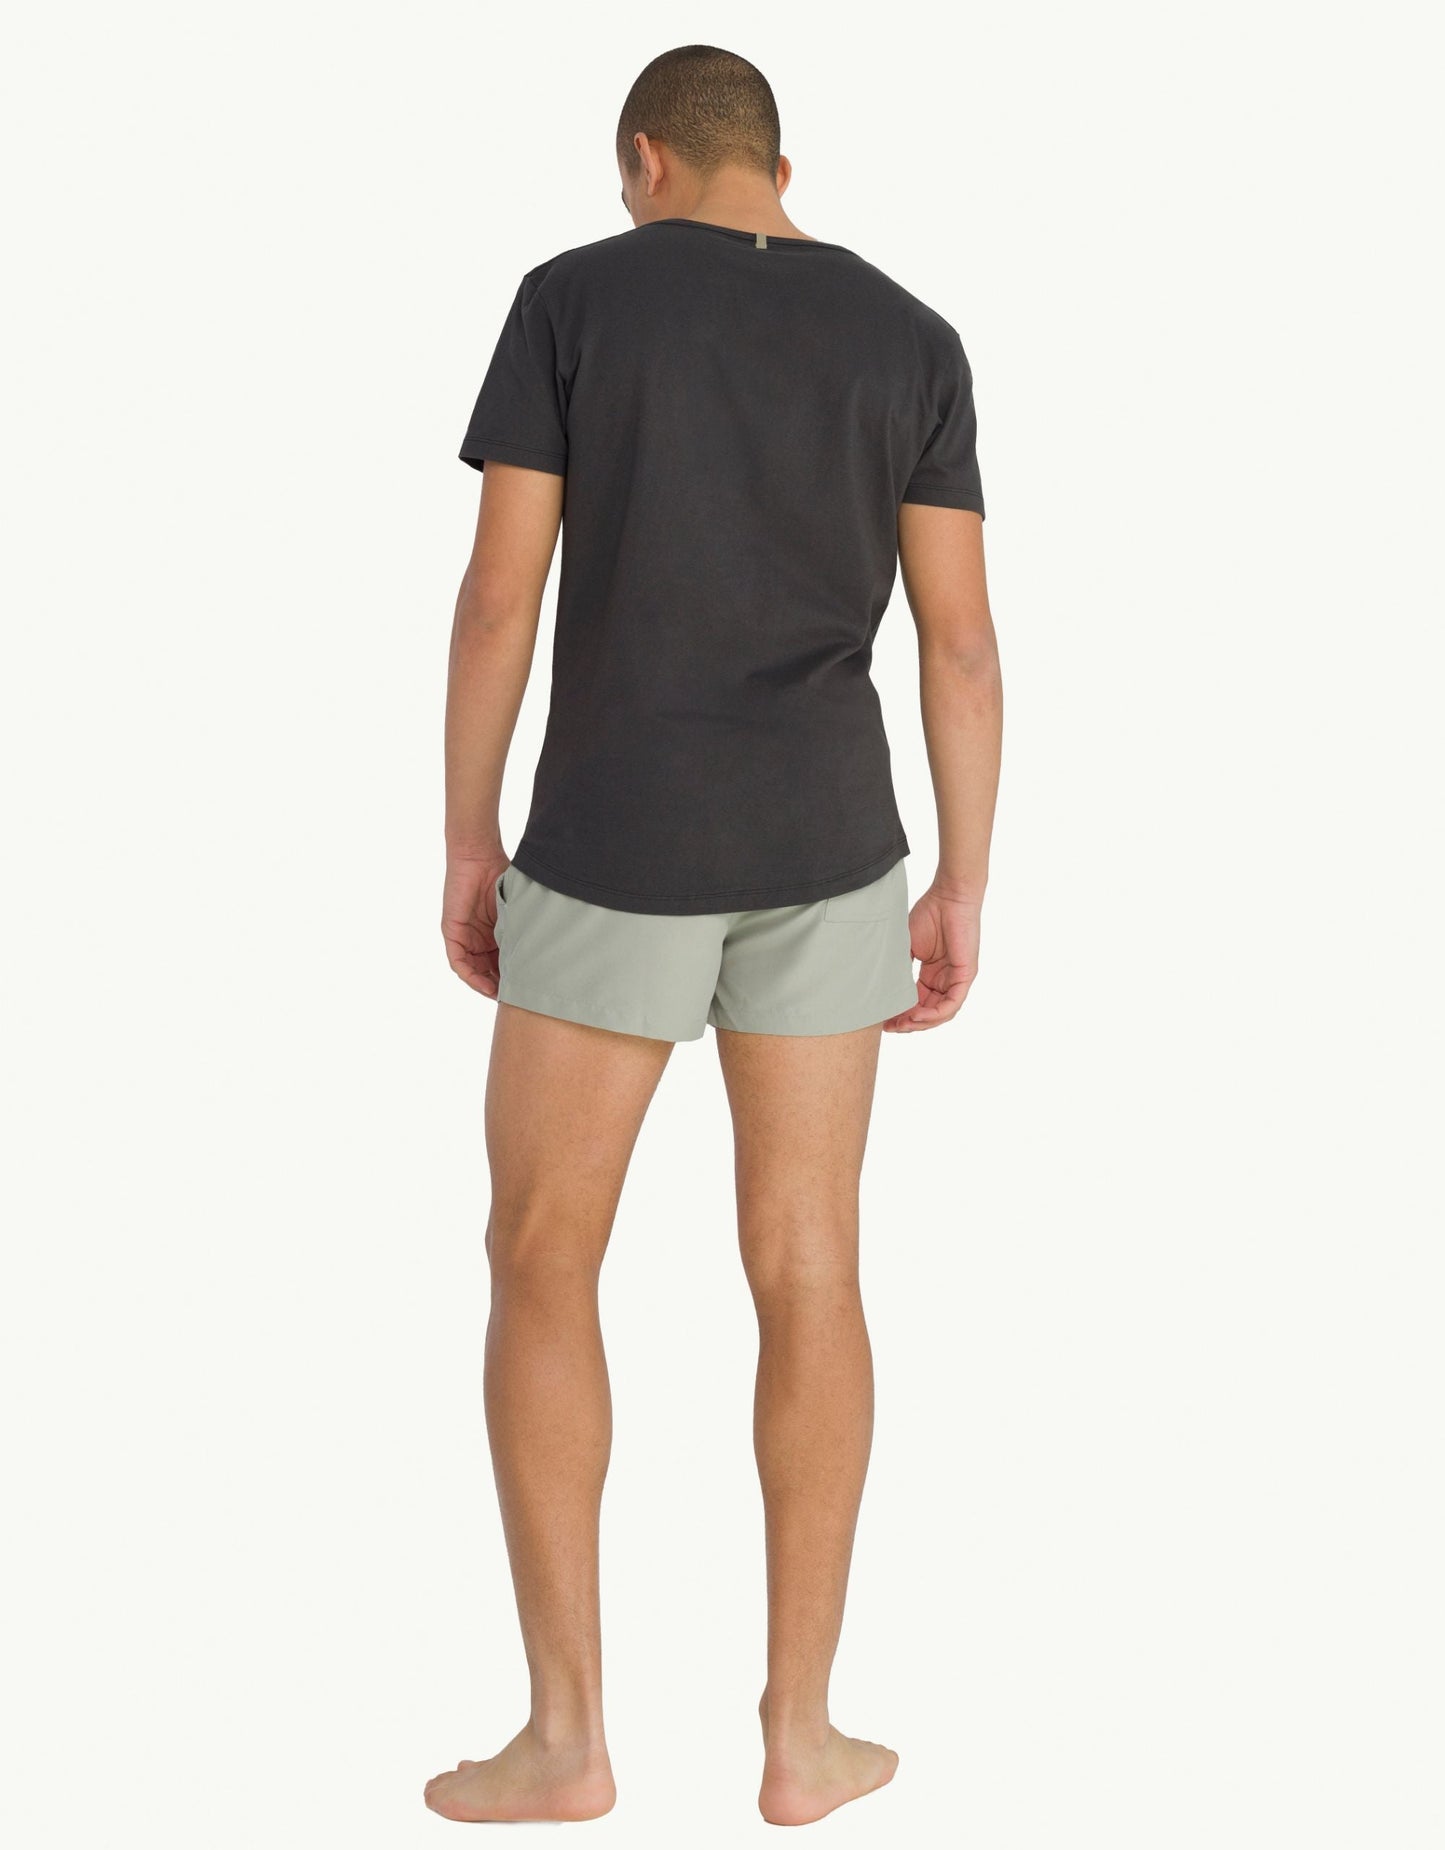 Explore sustainable fashion for men with our essential Unku Negro T-shirt in black. Crafted for everyday luxury, our tees offer unmatched softness and all-day comfort. Stay cool in our breathable organic cotton tees, made from 100% organic cotton for eco-conscious and skin-friendly wear.